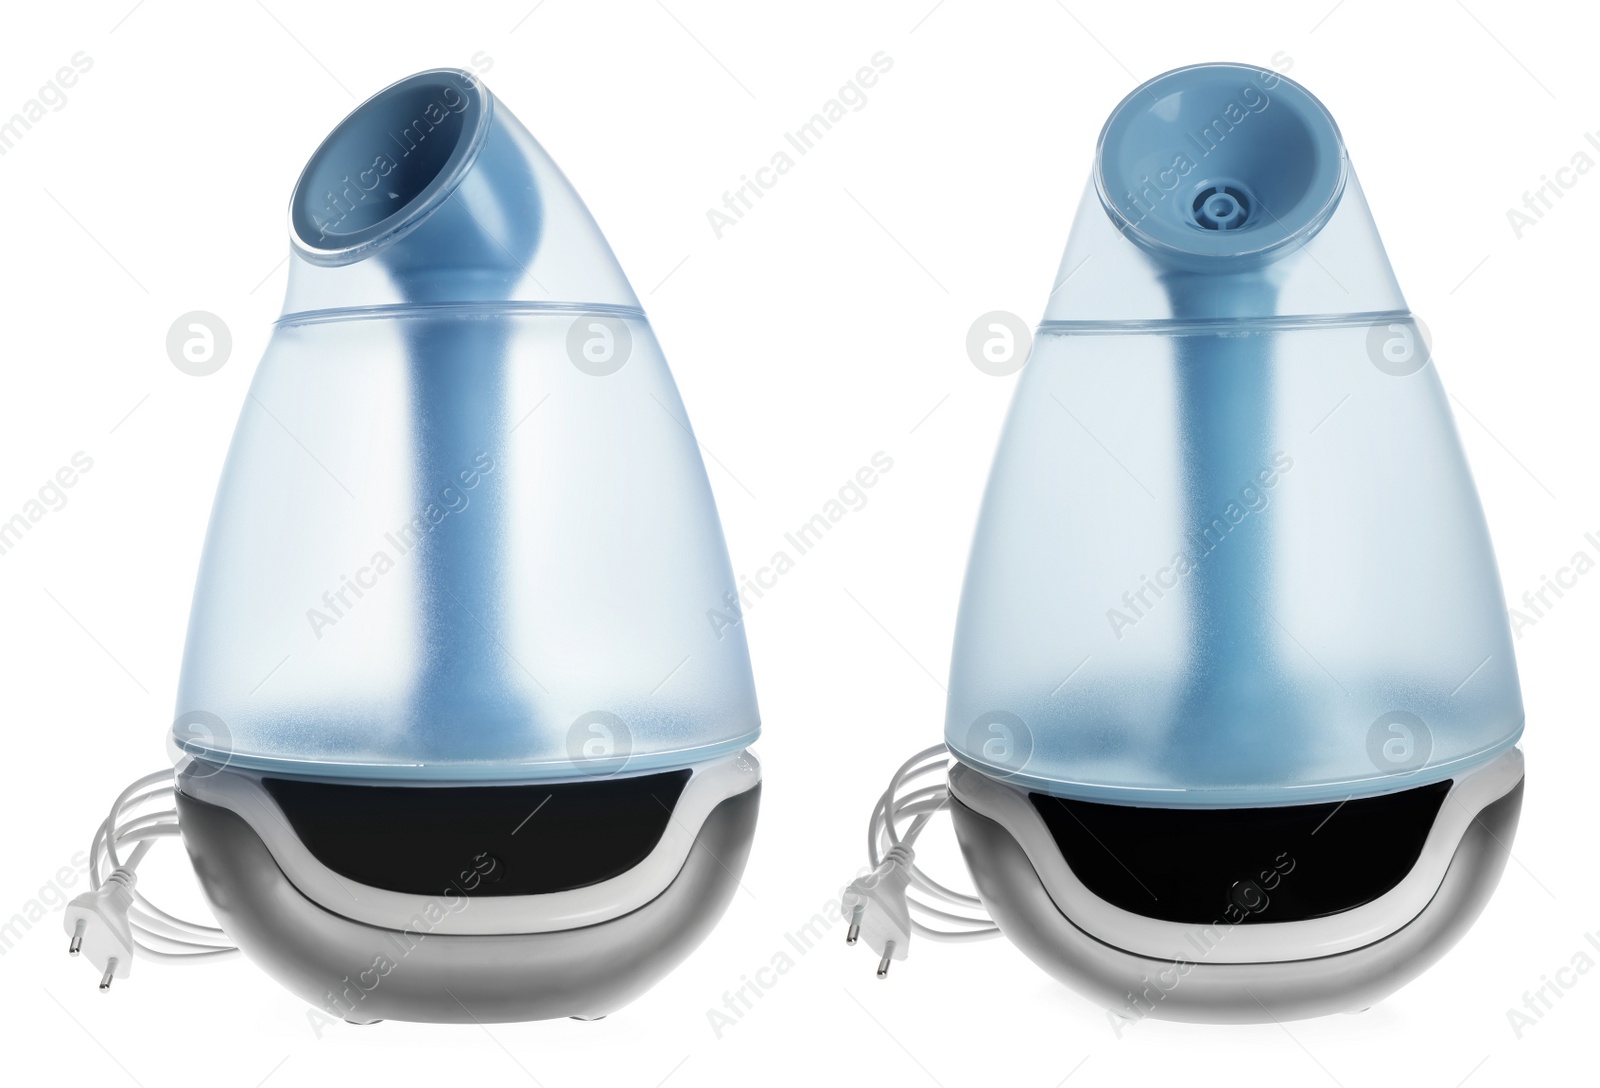 Image of Collage with modern humidifier on white background, view from different sides